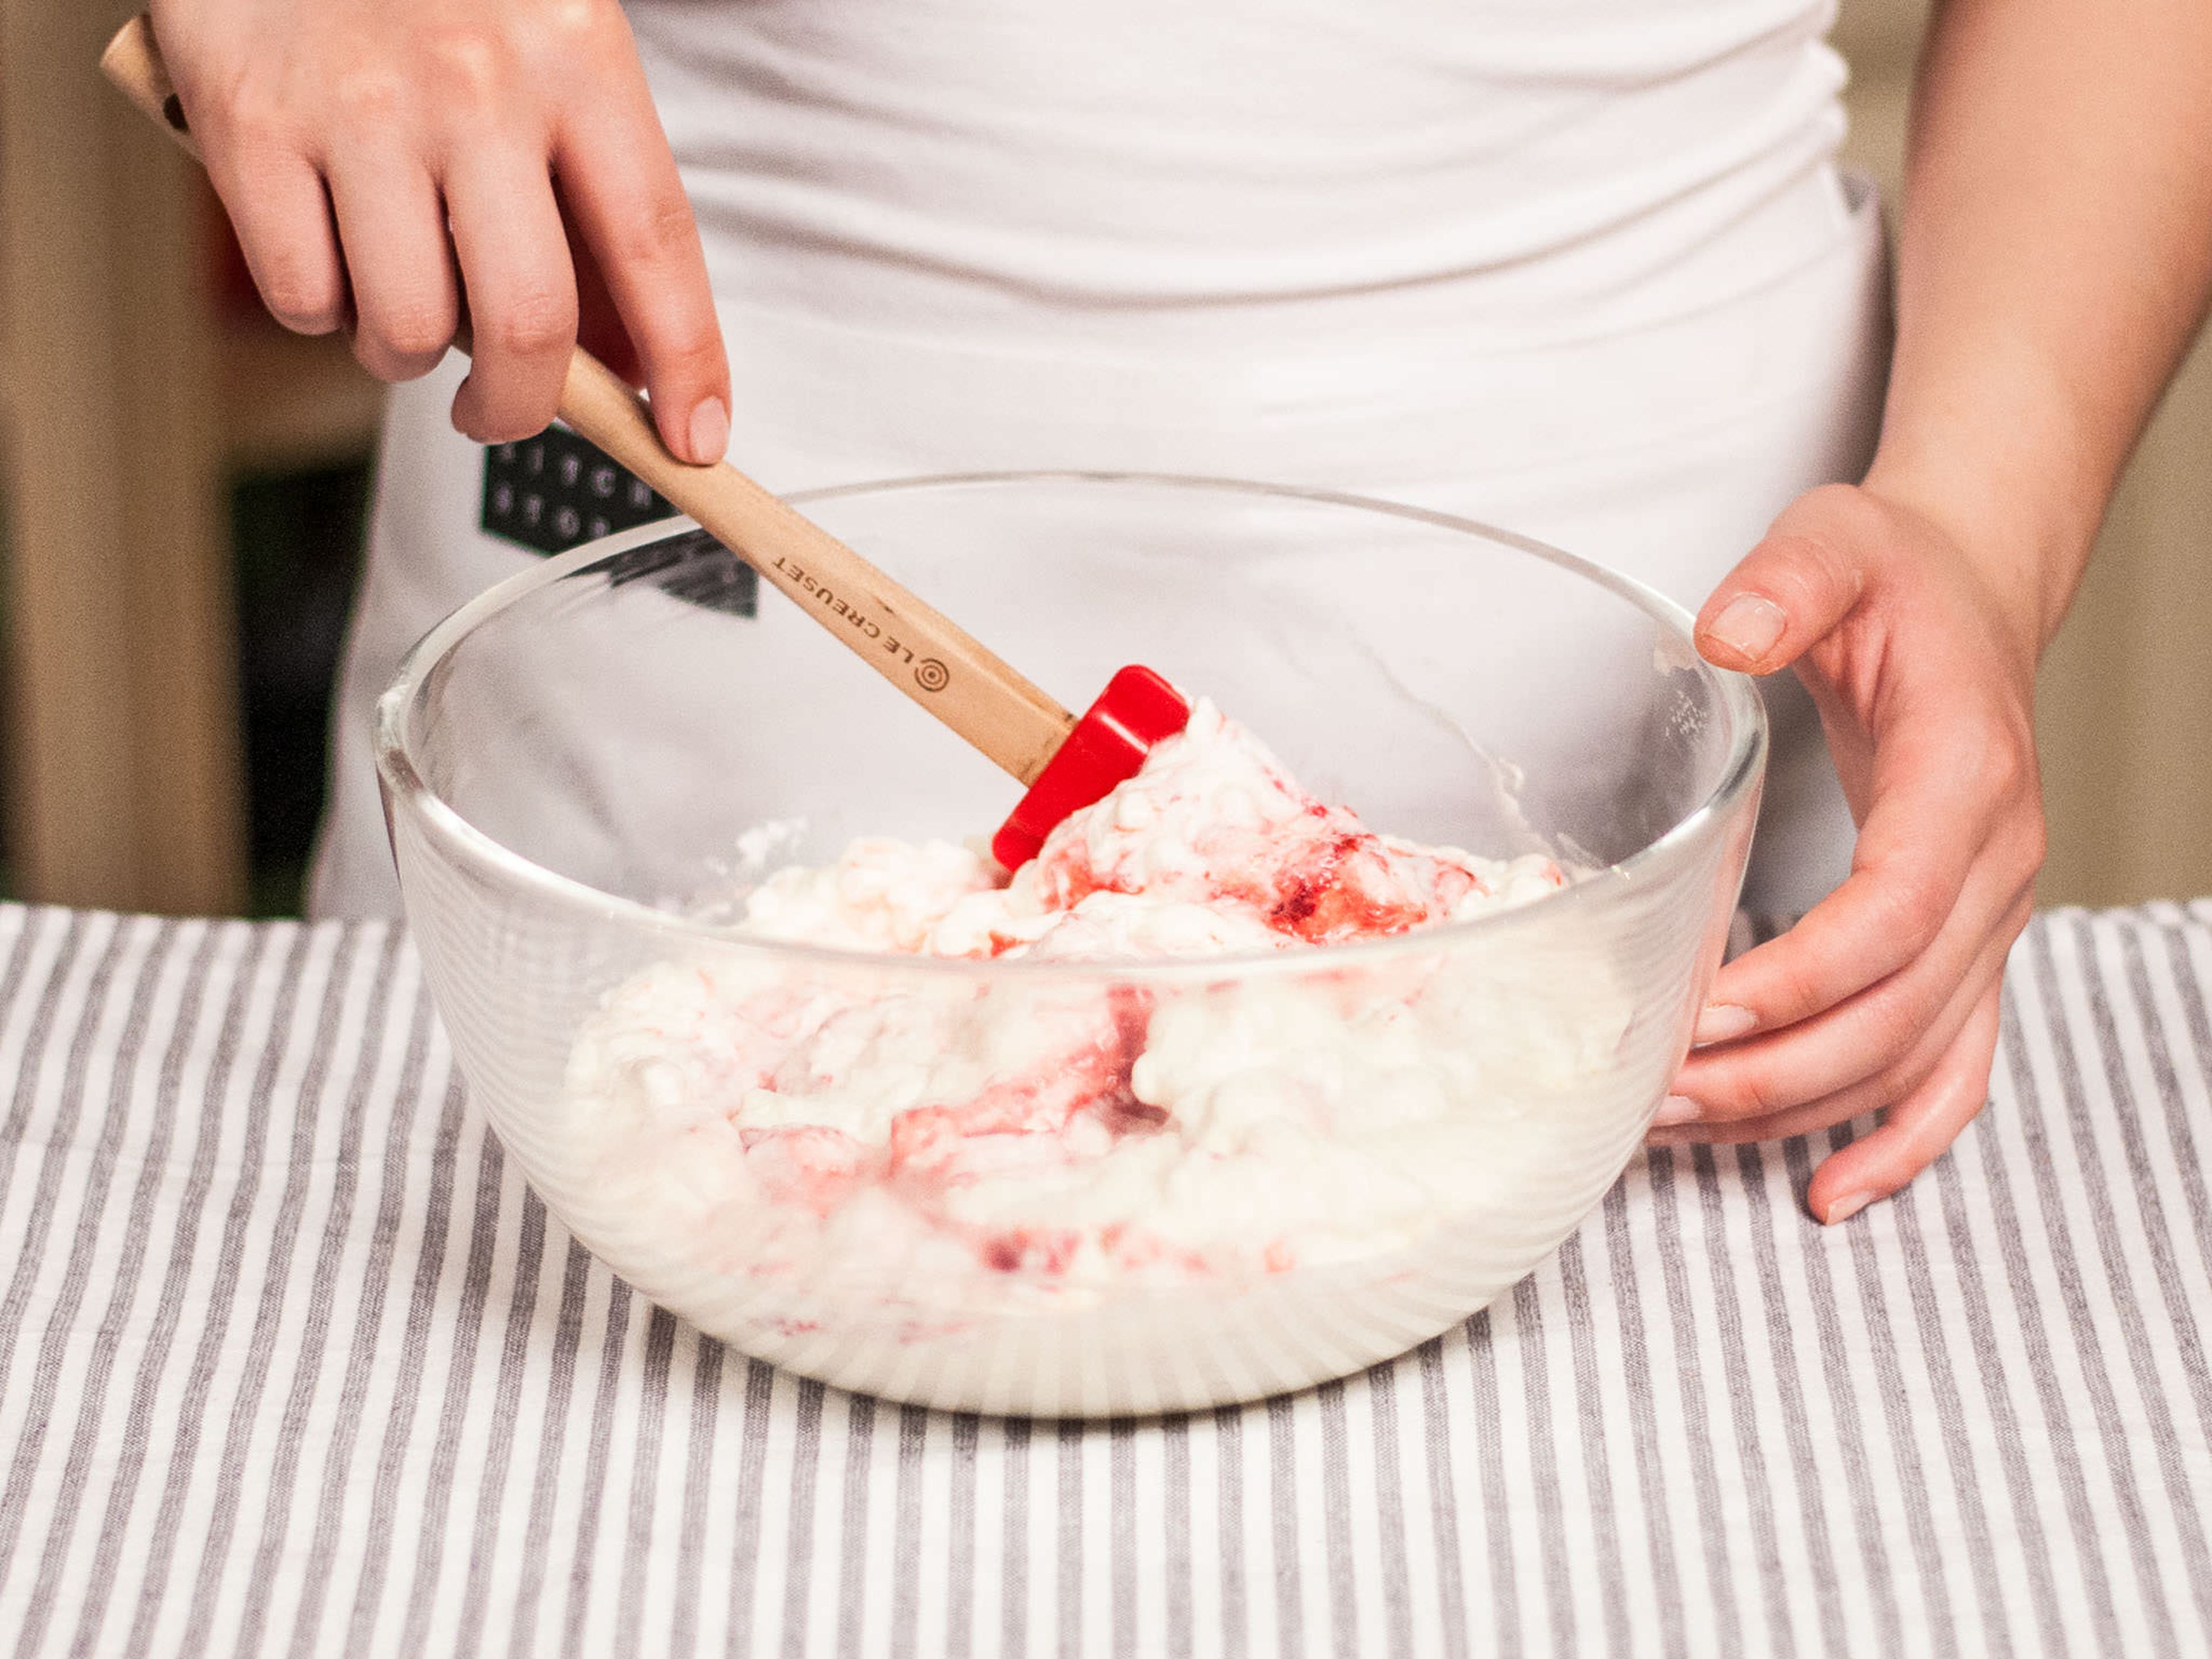 Gently fold meringue pieces and raspberry puree into whipped cream. Fill half of the cream mixture into serving dishes. Add fresh raspberries and cover with another layer of the cream mixture. Garnish with fresh mint to serve.